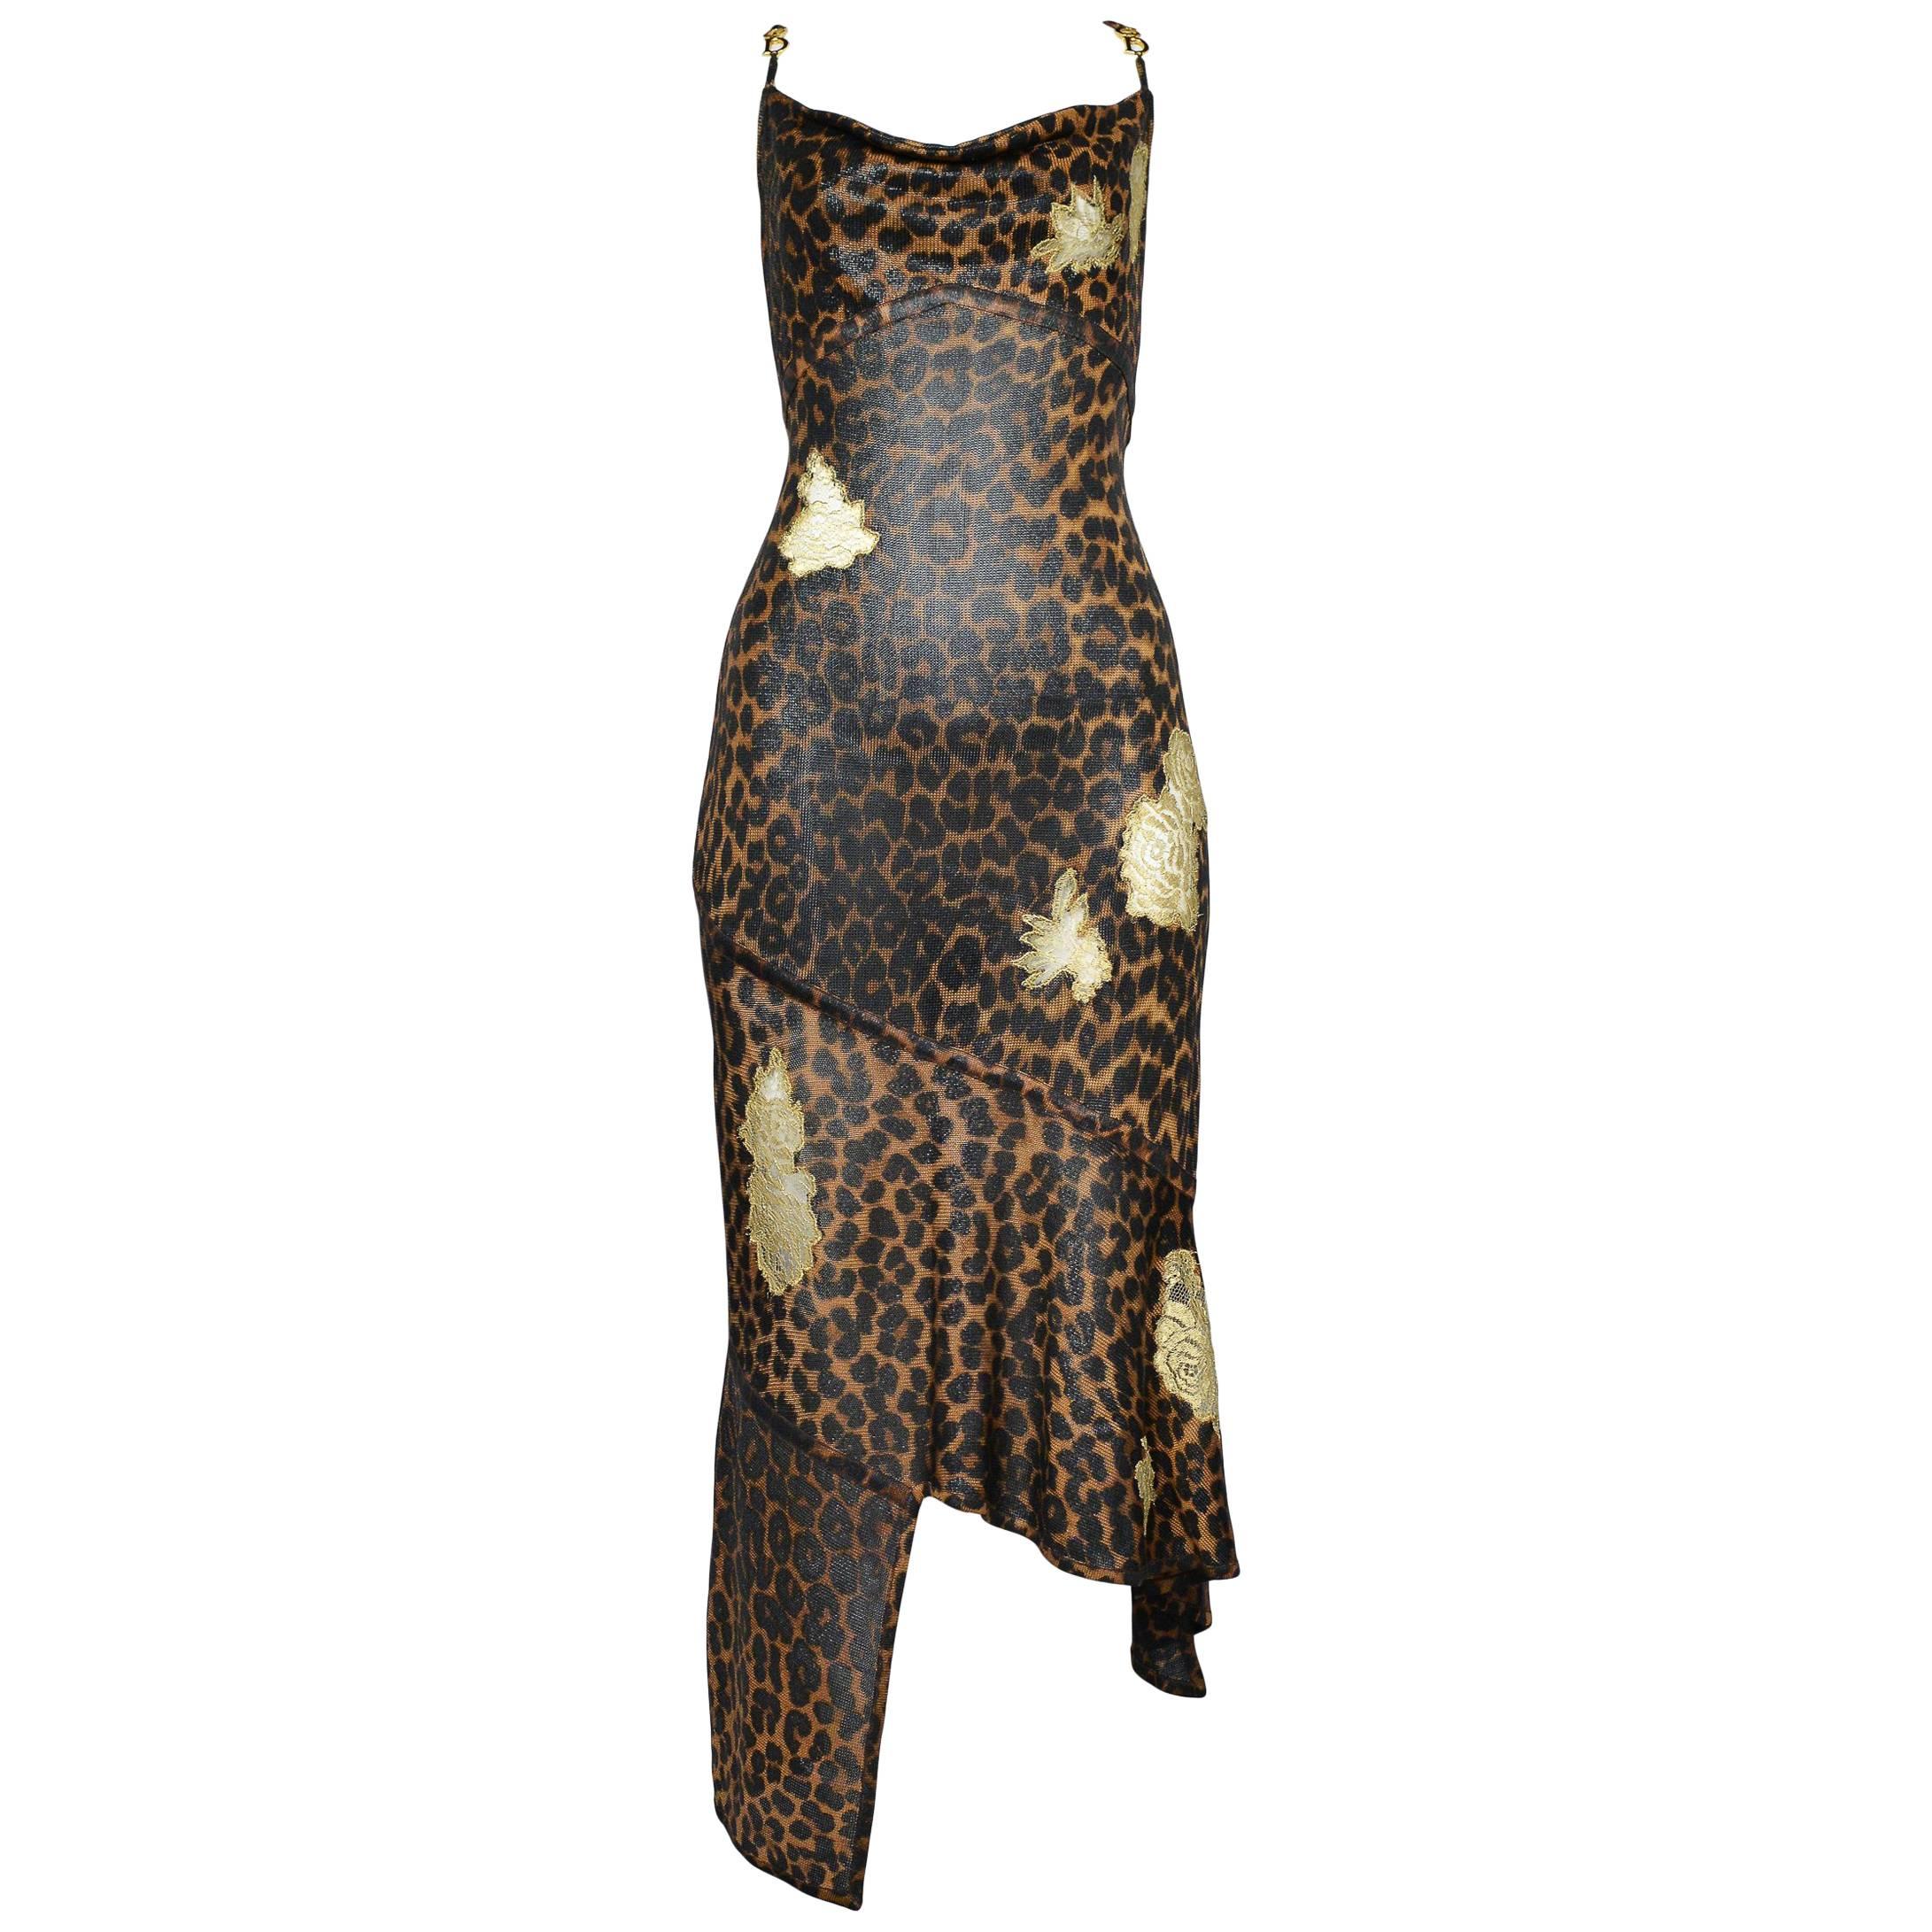 Dior by Galliano Leopard Metallic Knit Dress w Lace Applique & "CD" Charms 2000